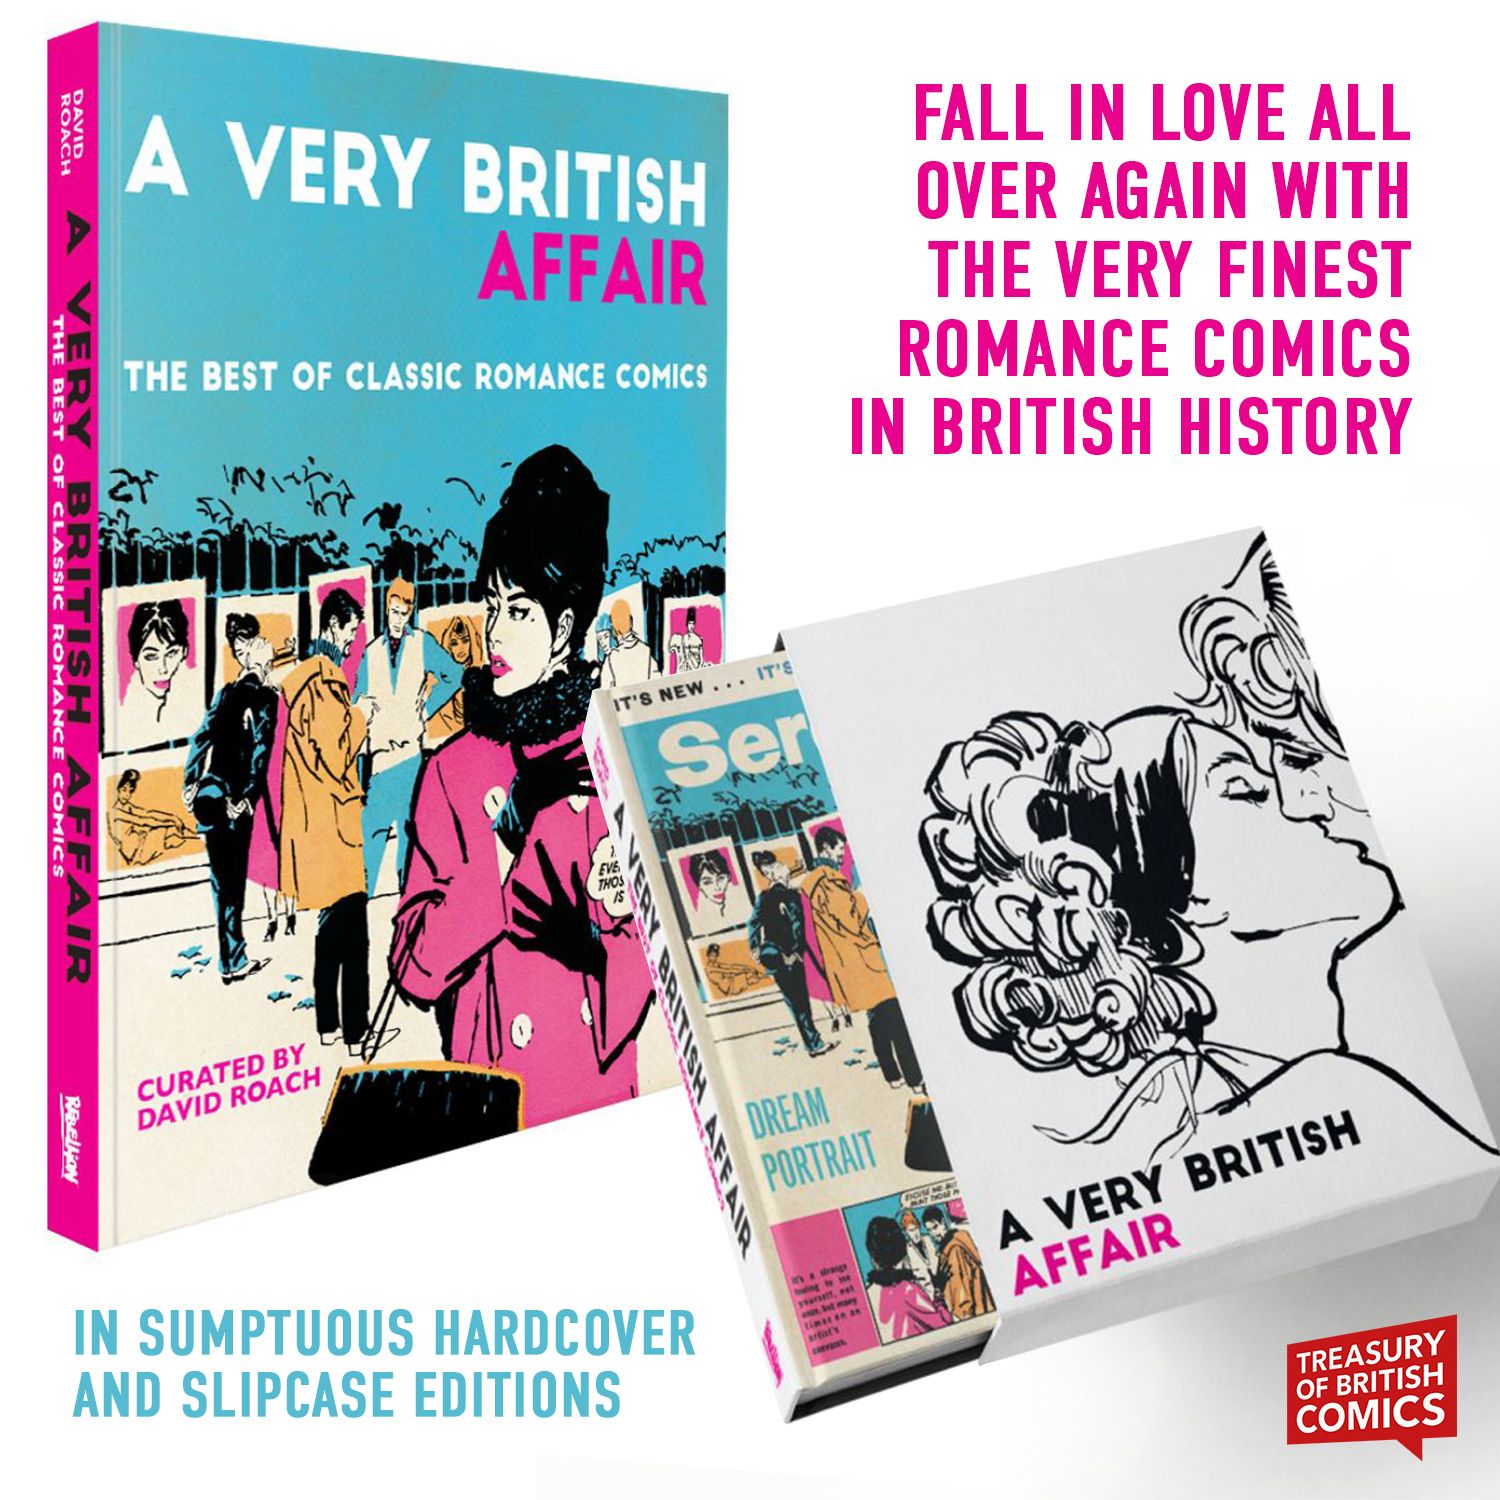 A Very British Affair: the perfect comic book Valentine’s Day gift